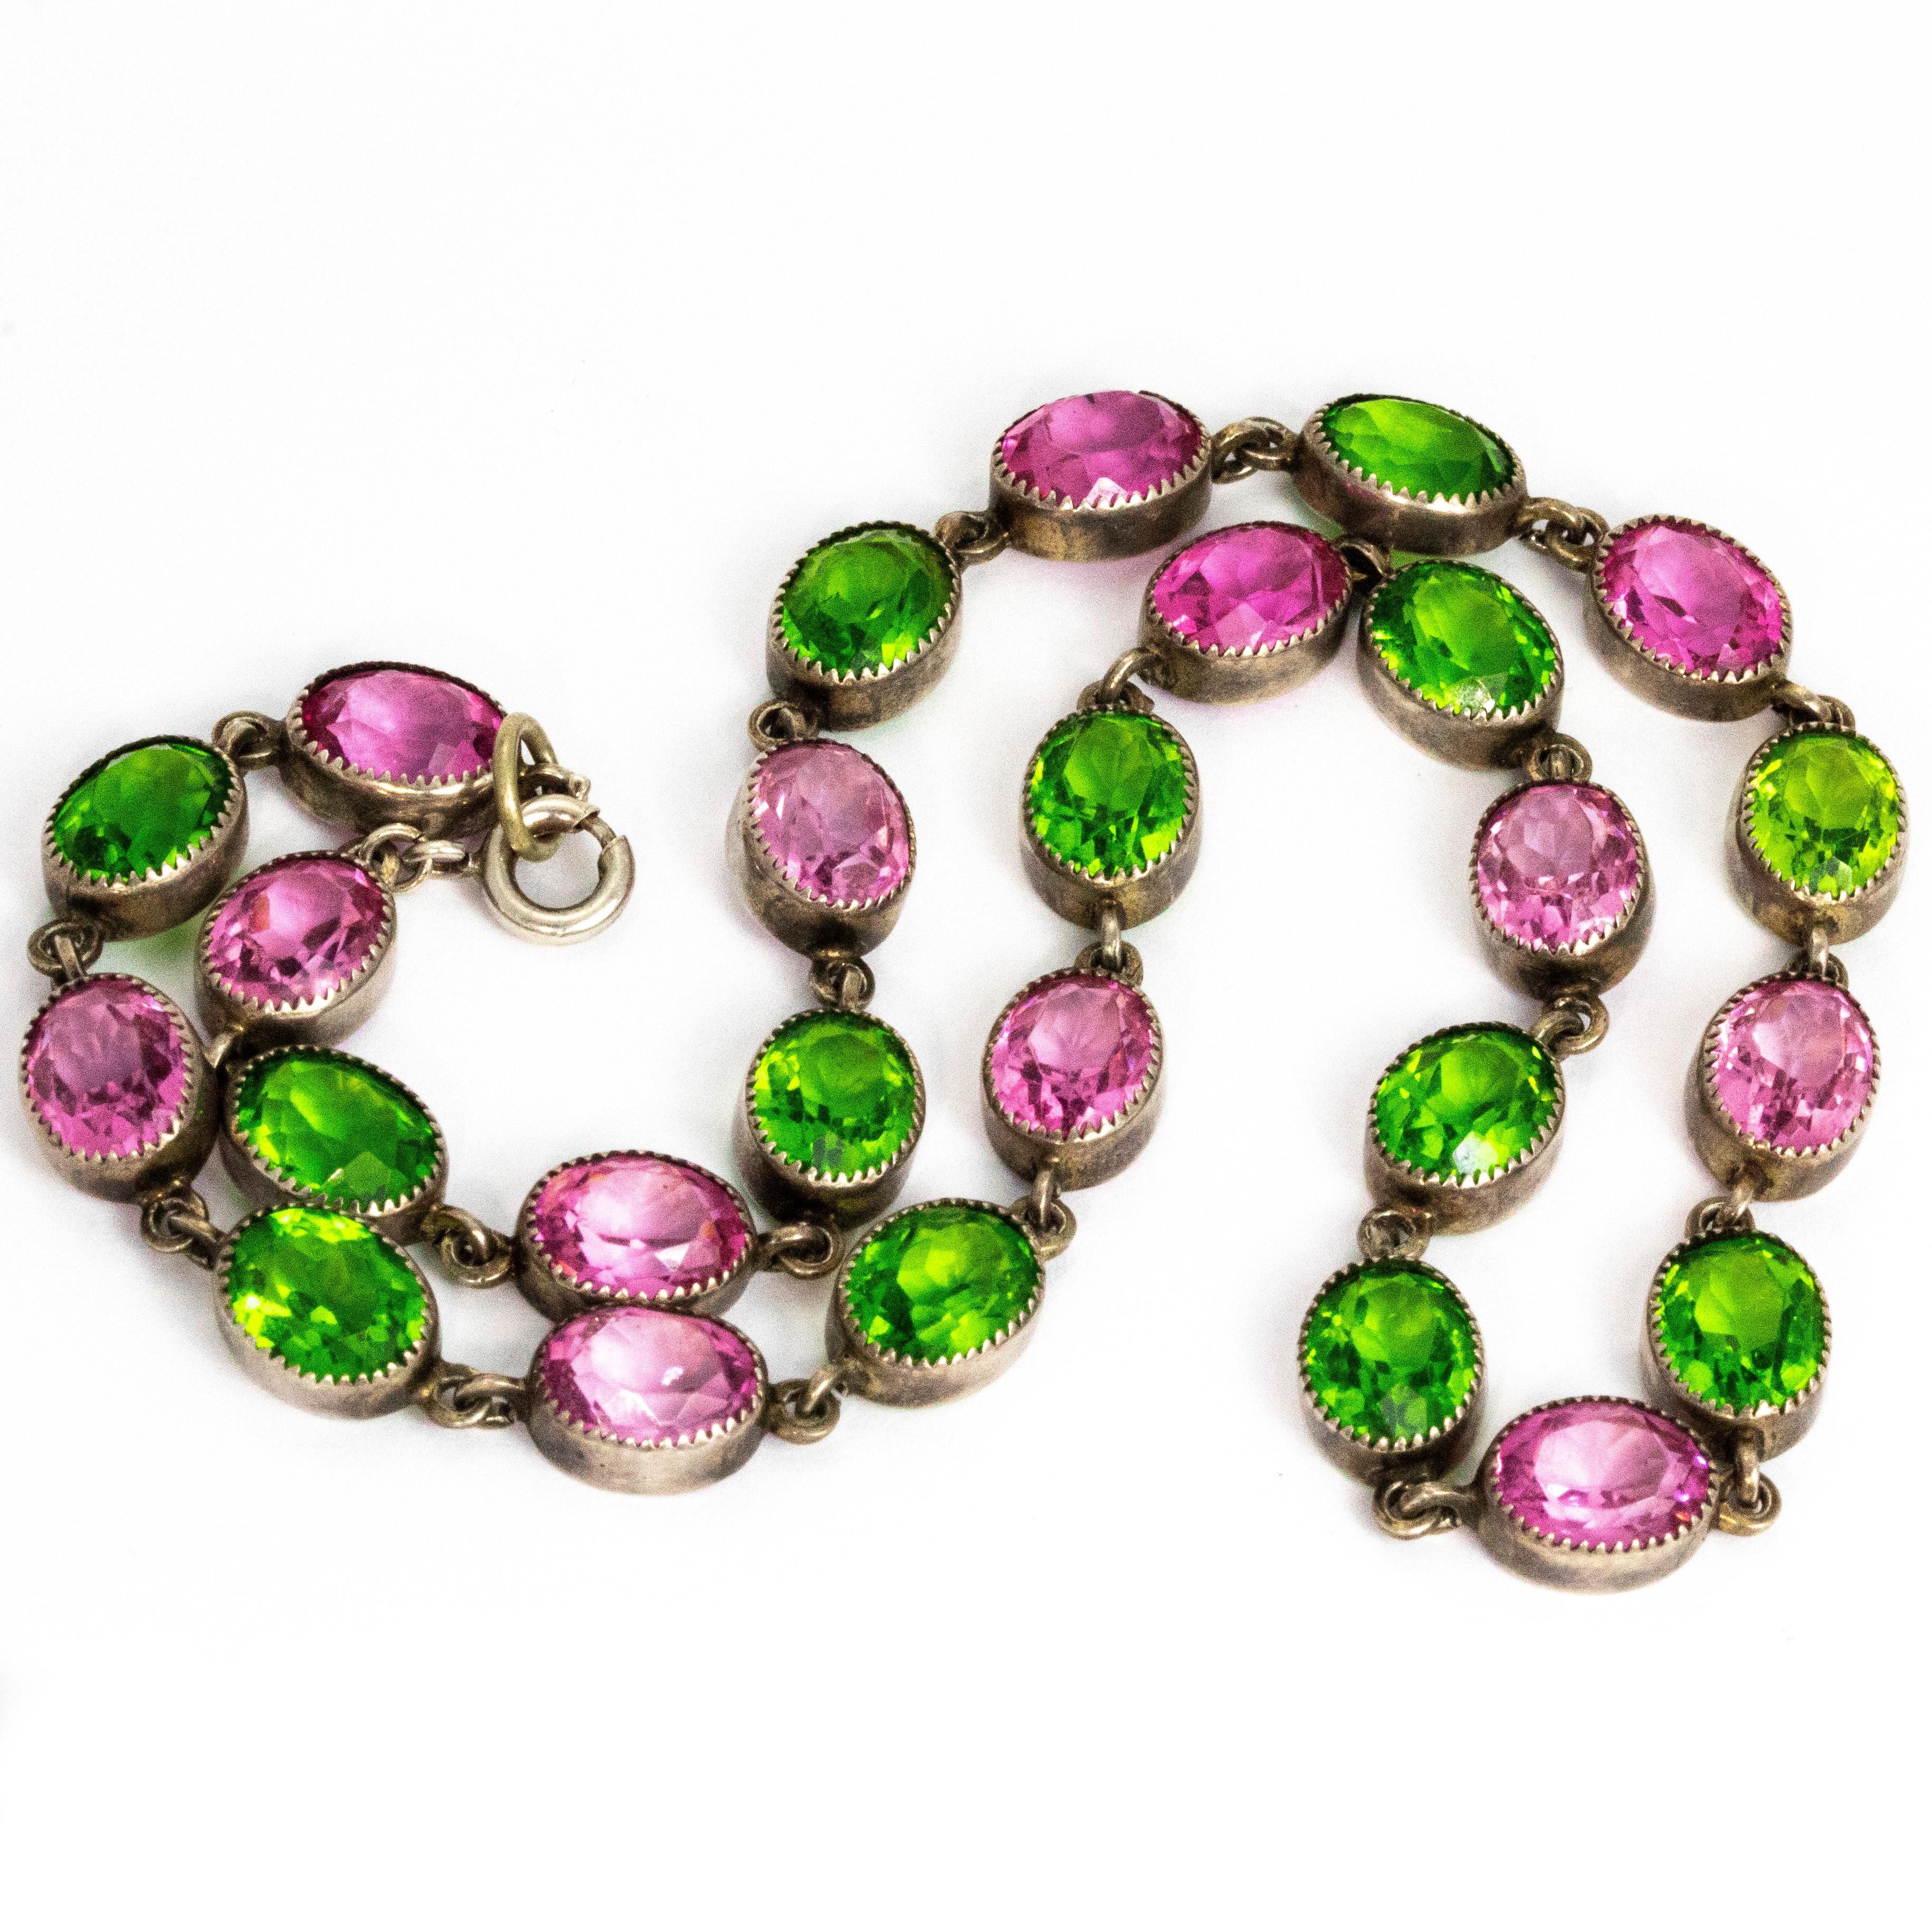 This riviera is absolutely stunning! The bright green and pink paste is a show stopping combination and are set in silver. Each paste is approximately 2.5carat each and oval in shape. The length of the necklace is lovely and would sit wonderfully on